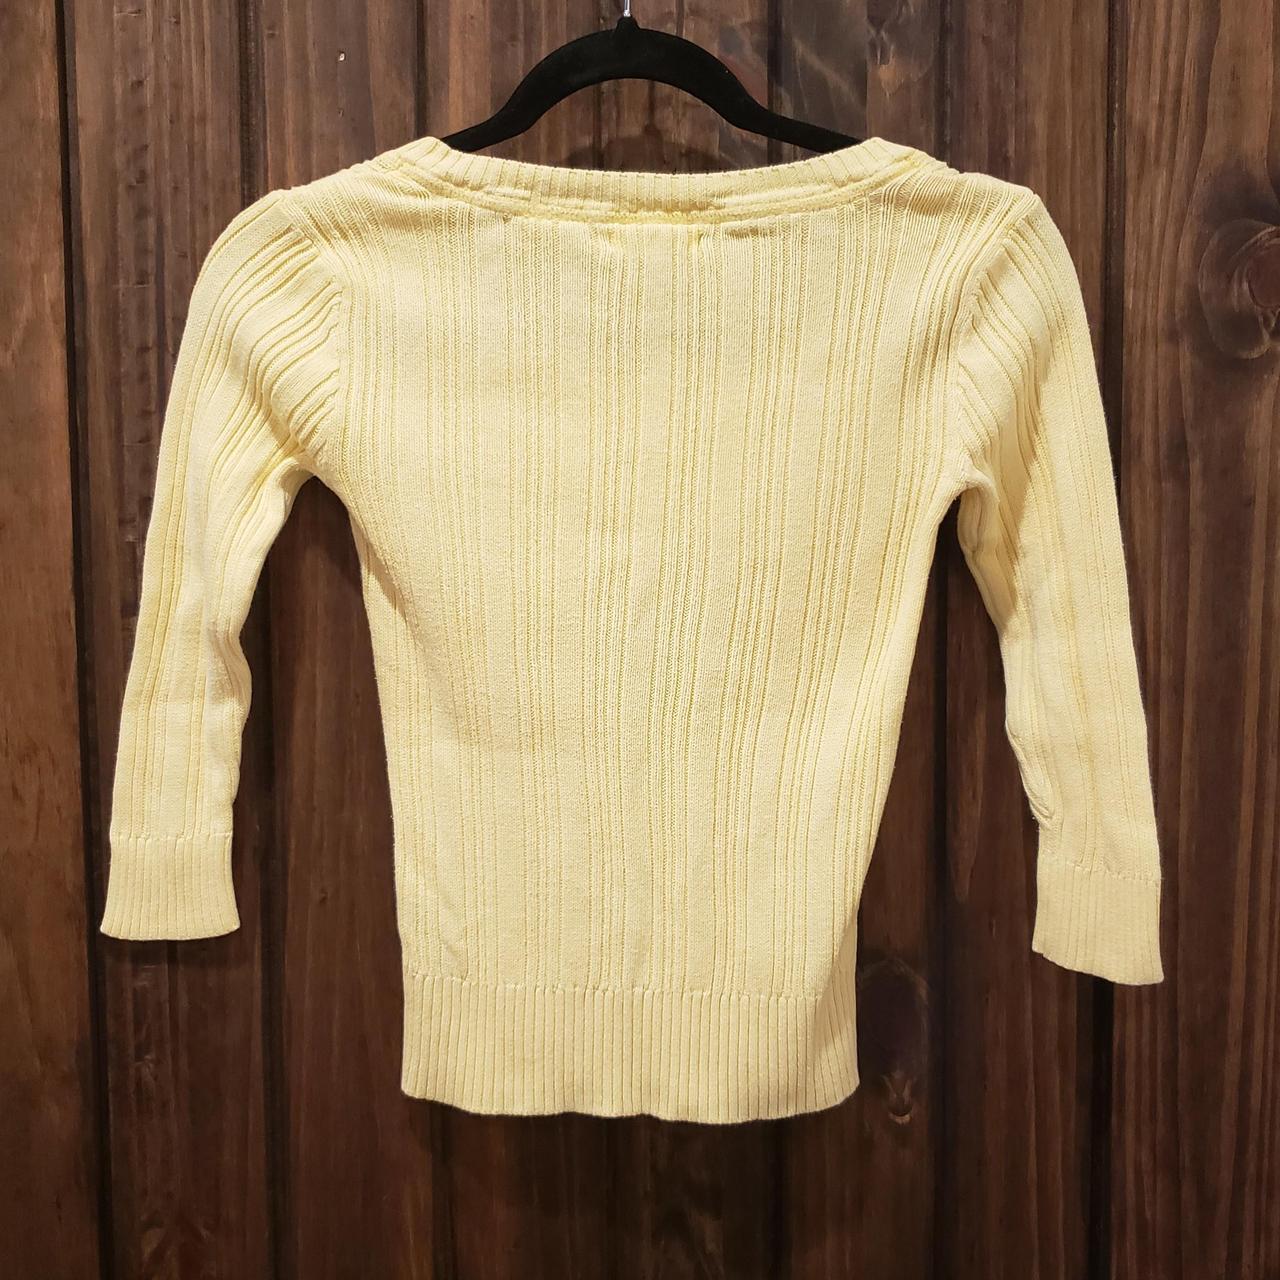 AEROPOSTALE YELLOW SCOOP NECK CABLE KNIT SWEATER TOP... - Depop